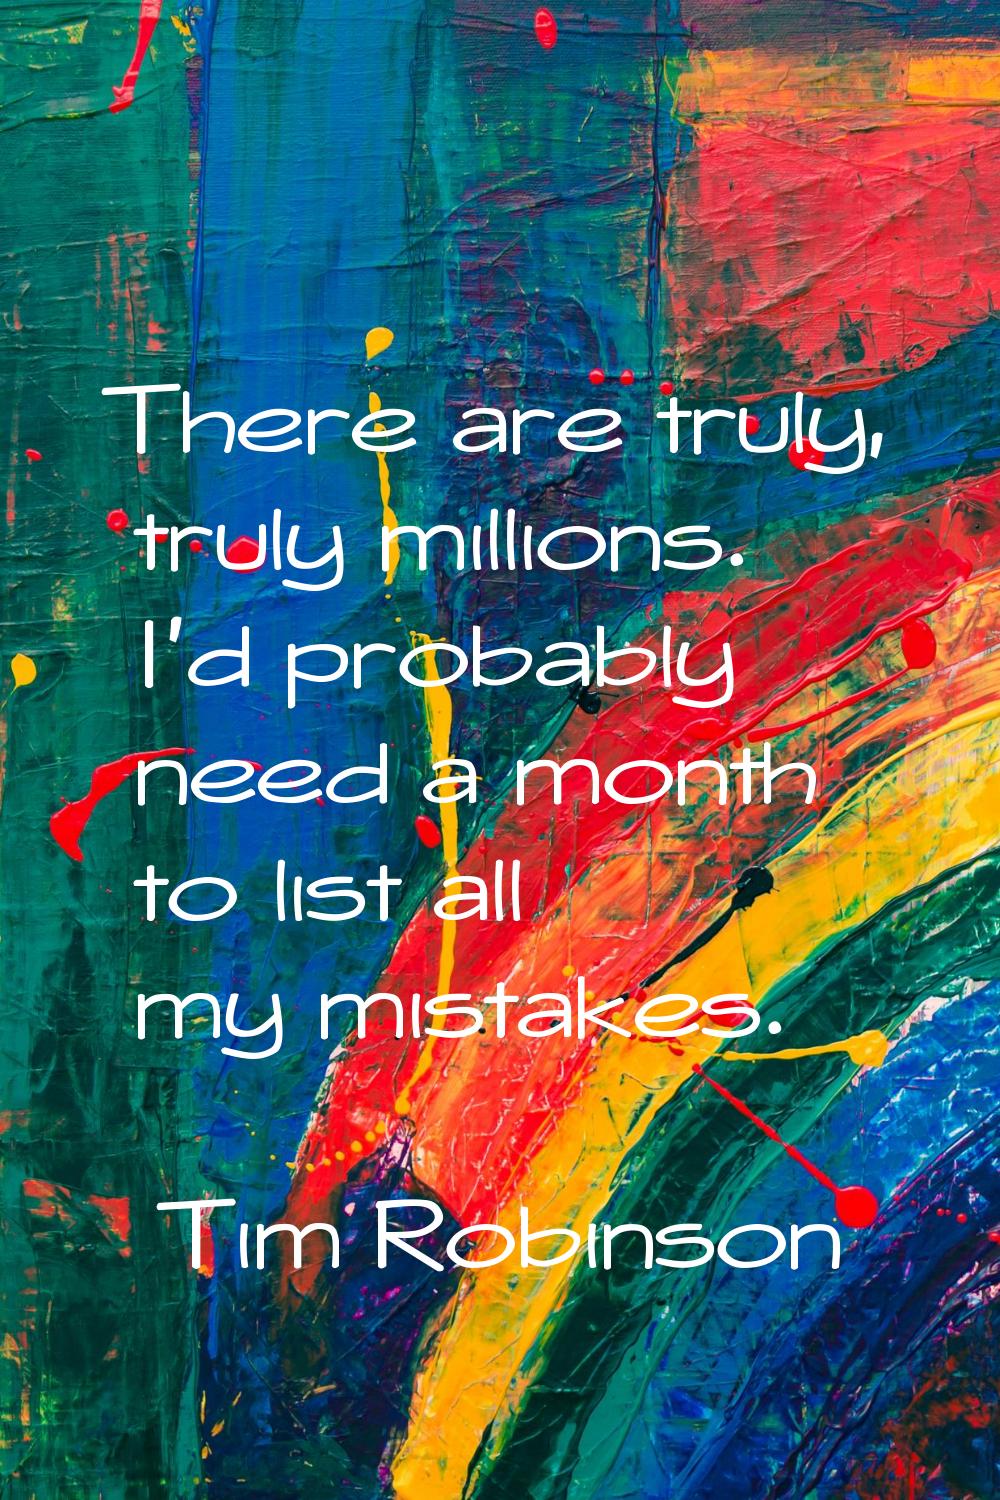 There are truly, truly millions. I'd probably need a month to list all my mistakes.